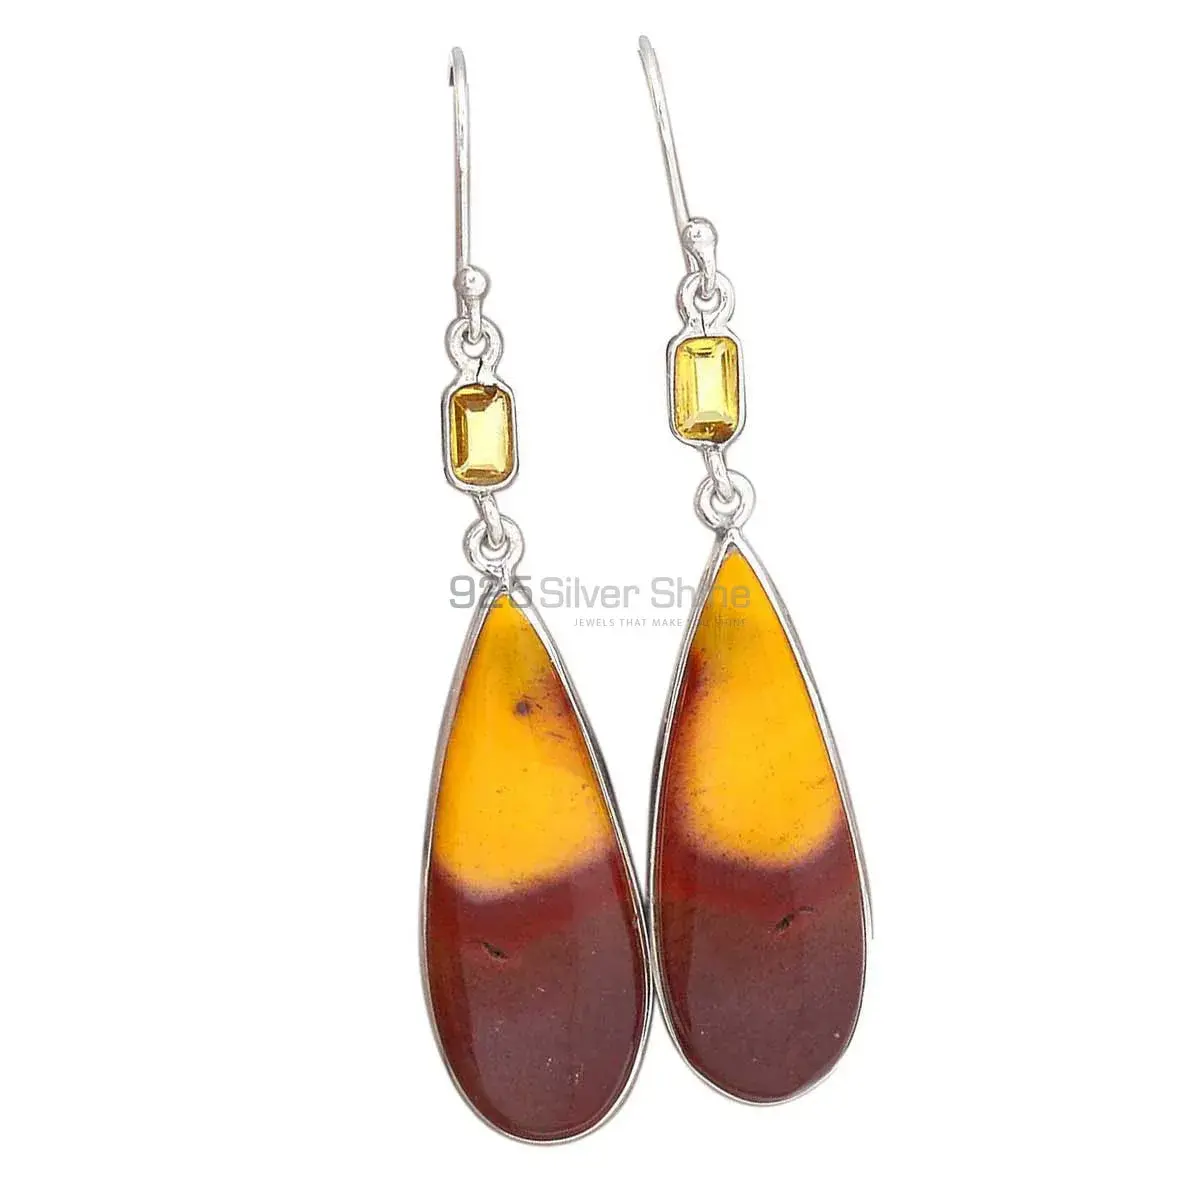 Natural Mookaite, Citrine Gemstone Earrings Manufacturer In 925 Sterling Silver Jewelry 925SE2736_0